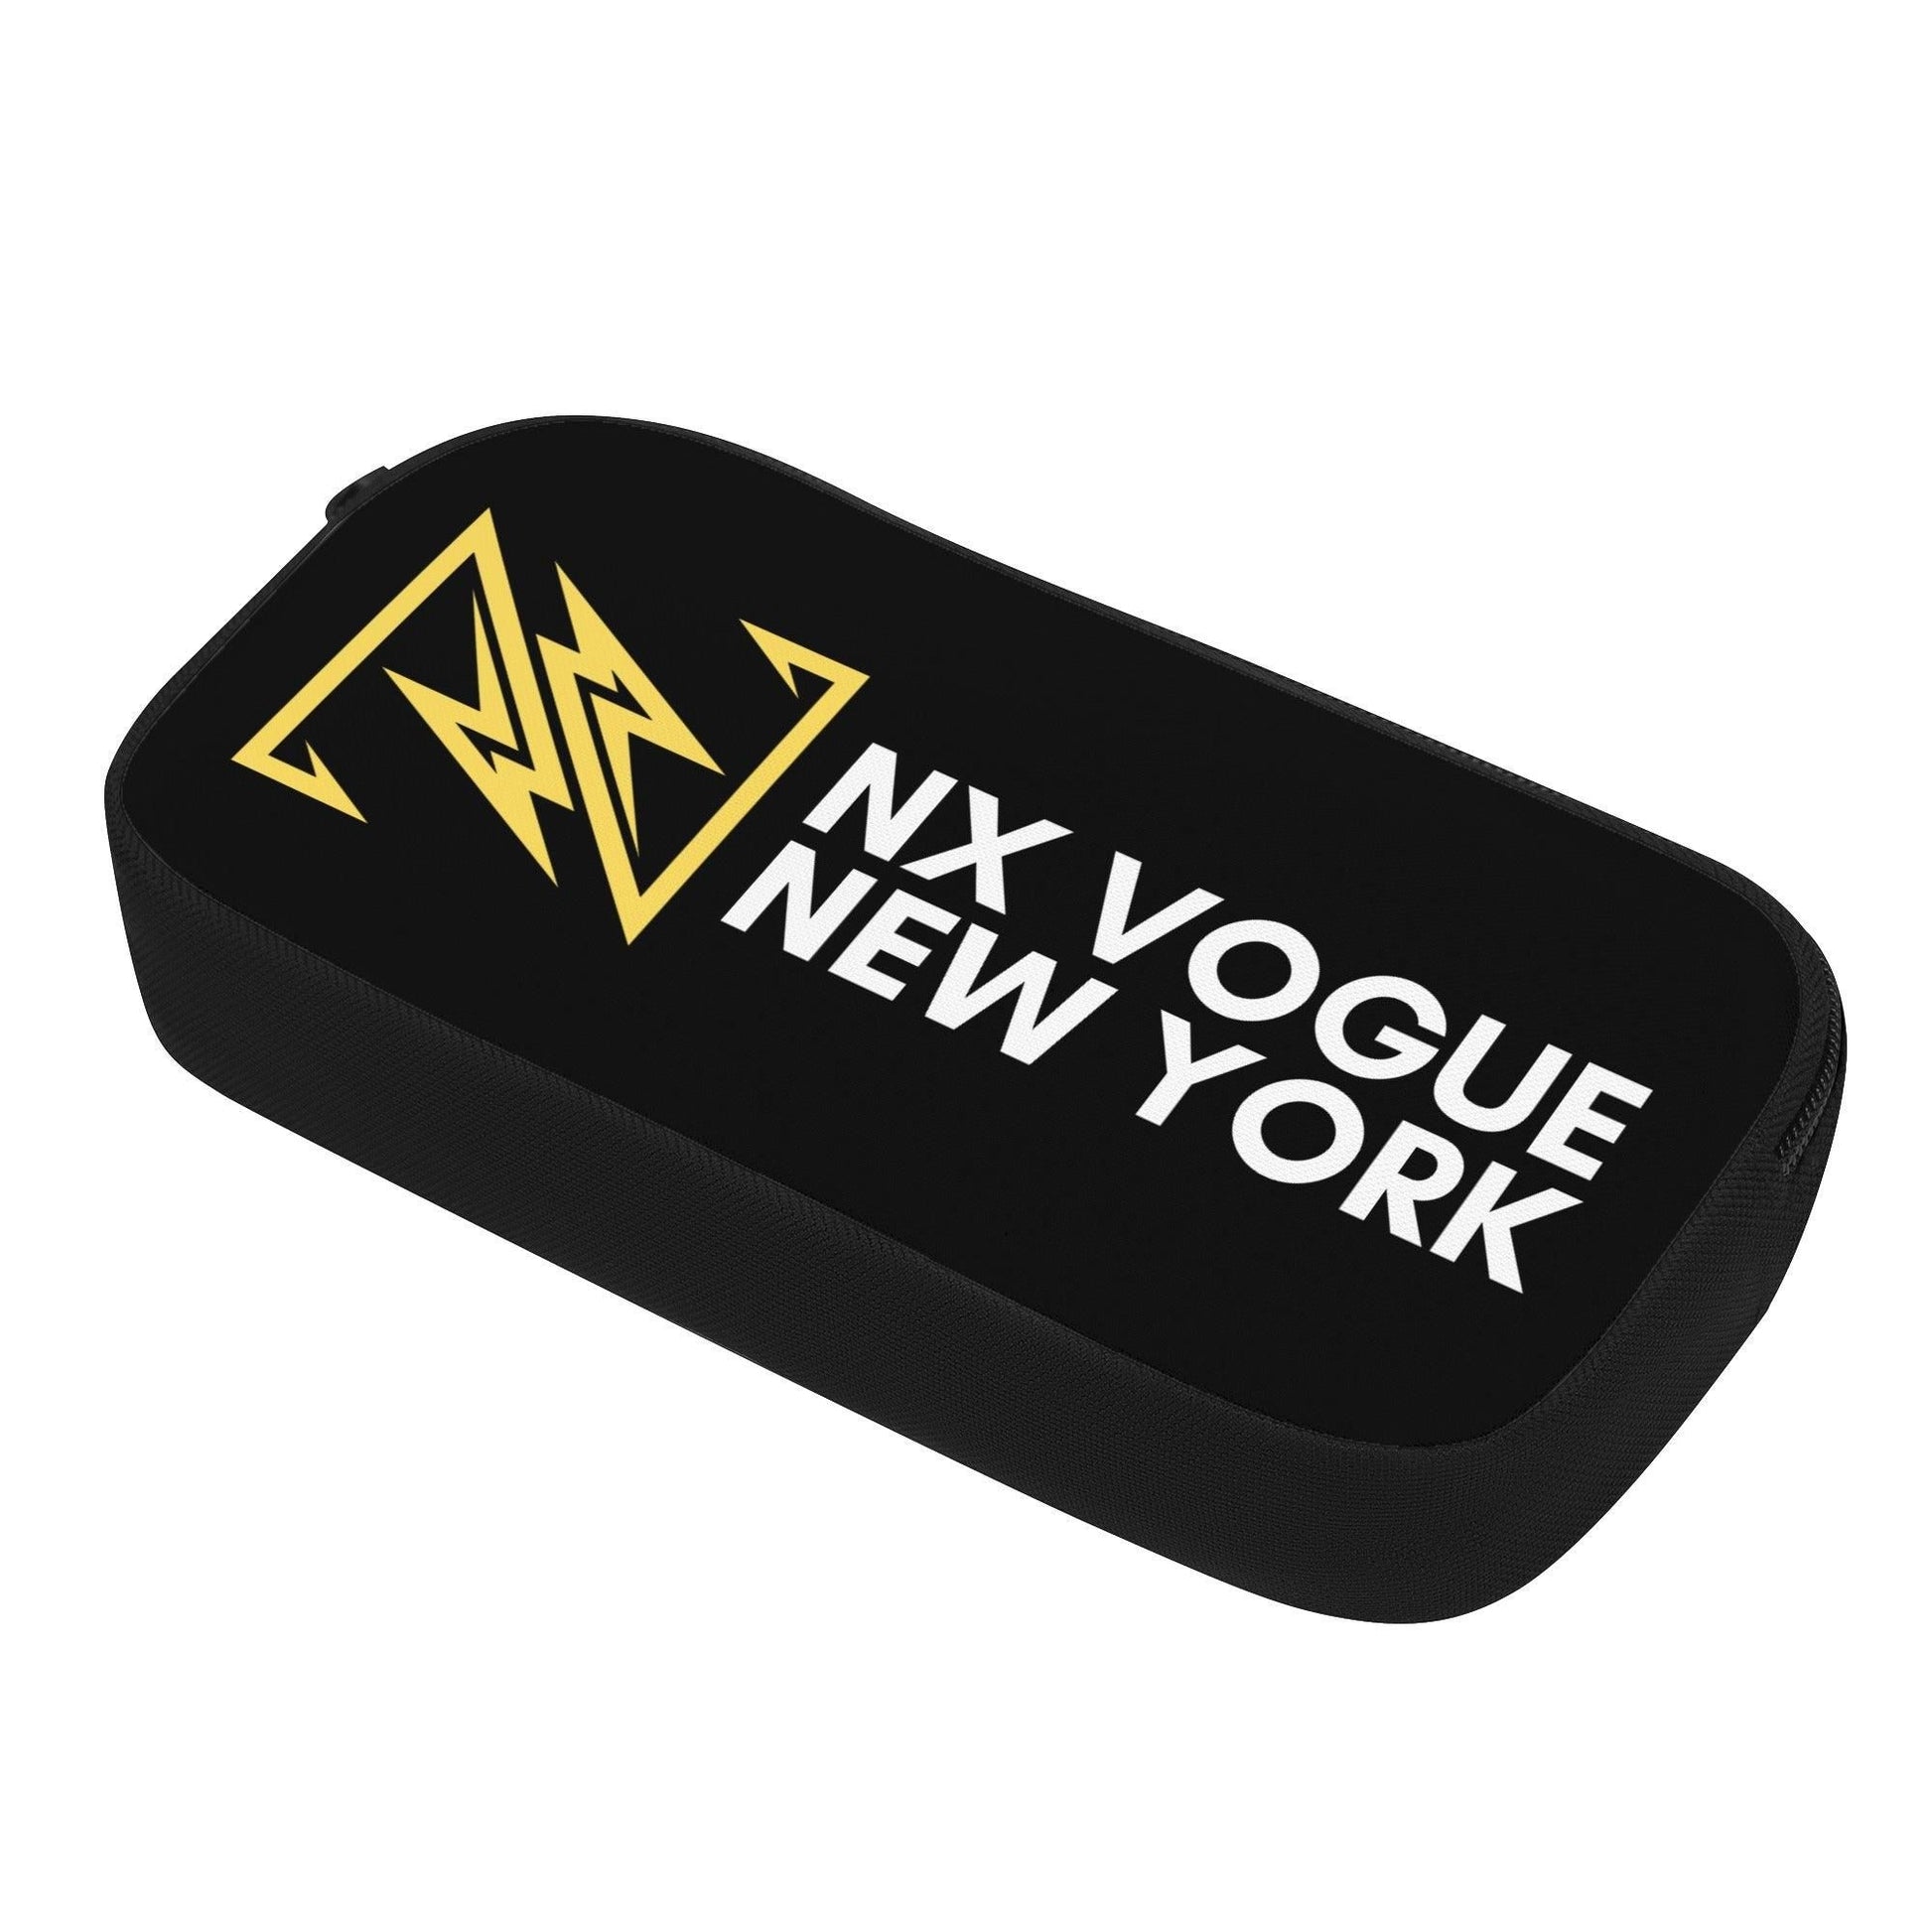 NX Vogue Limited Edition    